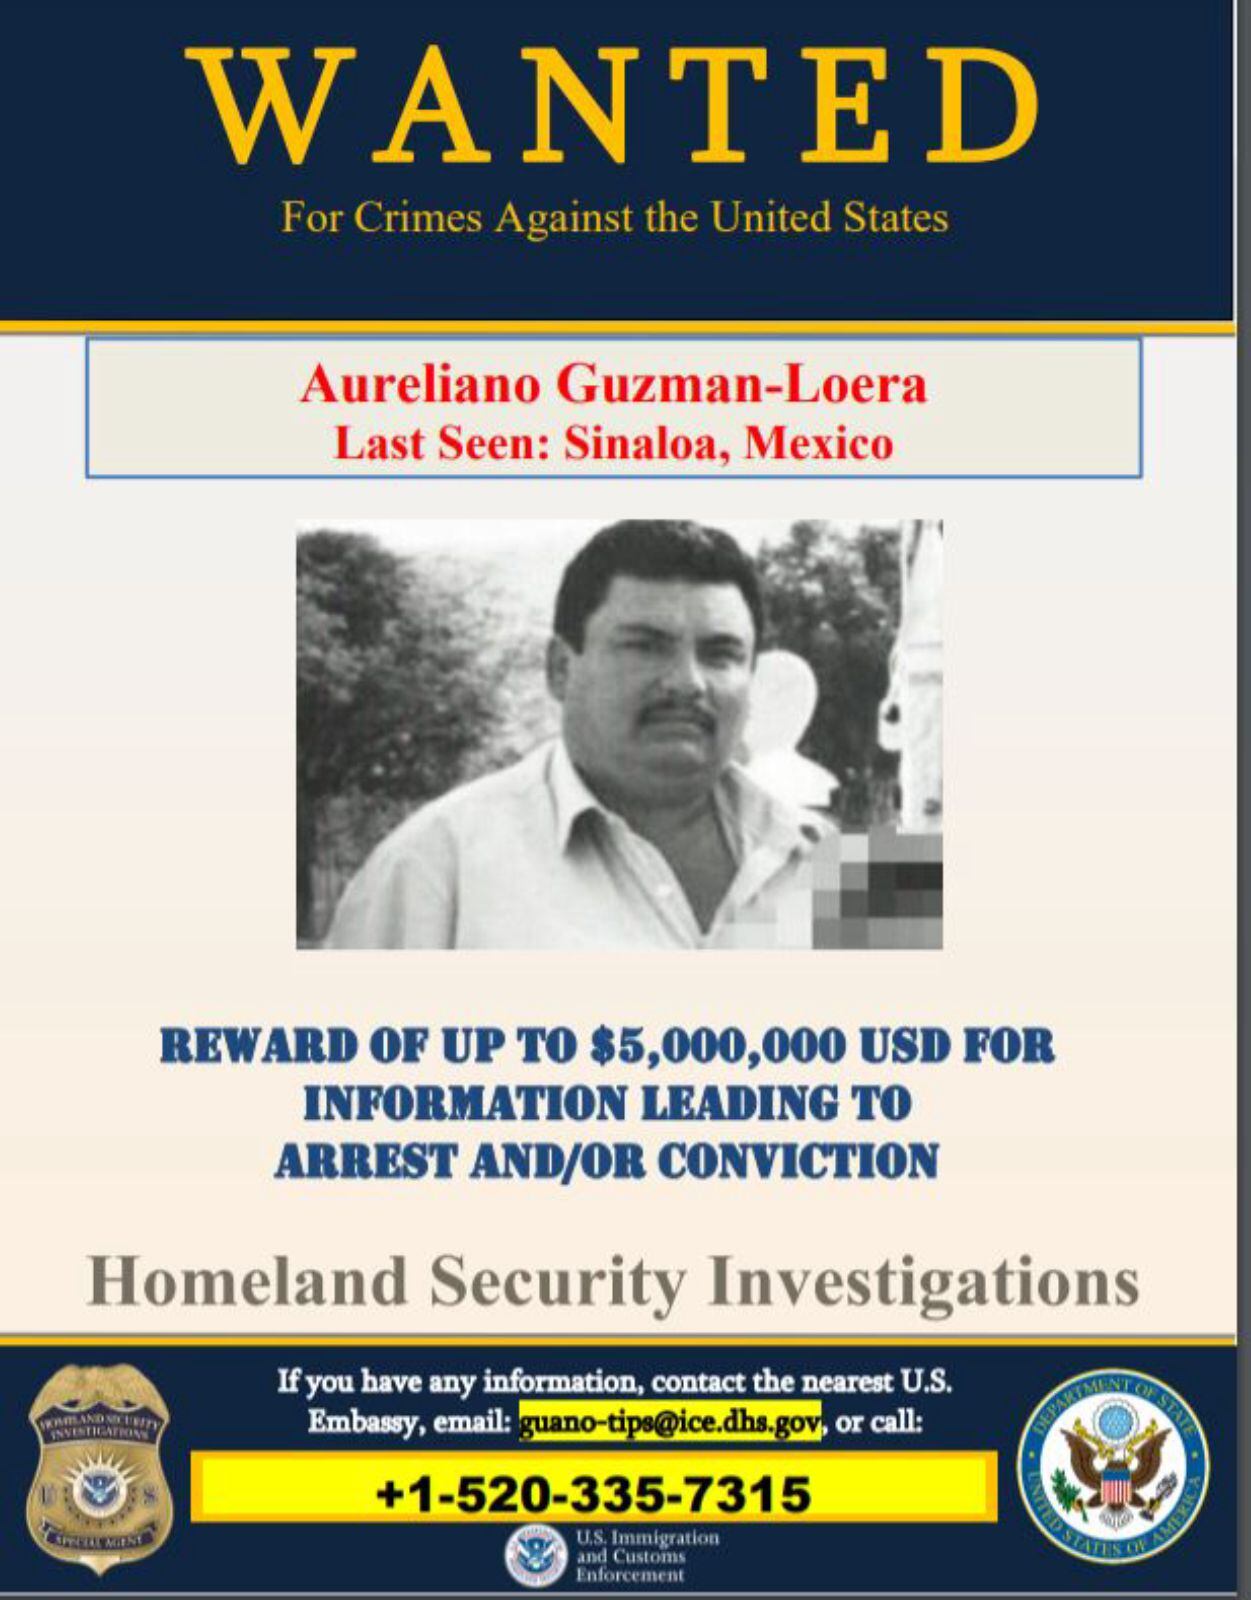 Aureliano Guzman-Loera of Sinaloa, MX, and brothers Ruperto, Jose, and Heriberto Salgueiro-Nevarez are wanted for international drug trafficking. Up to $5 mill USD reward for info leading to any arrest and/or conviction. @HSIPhoenix asks people w/ info to pls call 1-520-335-7315